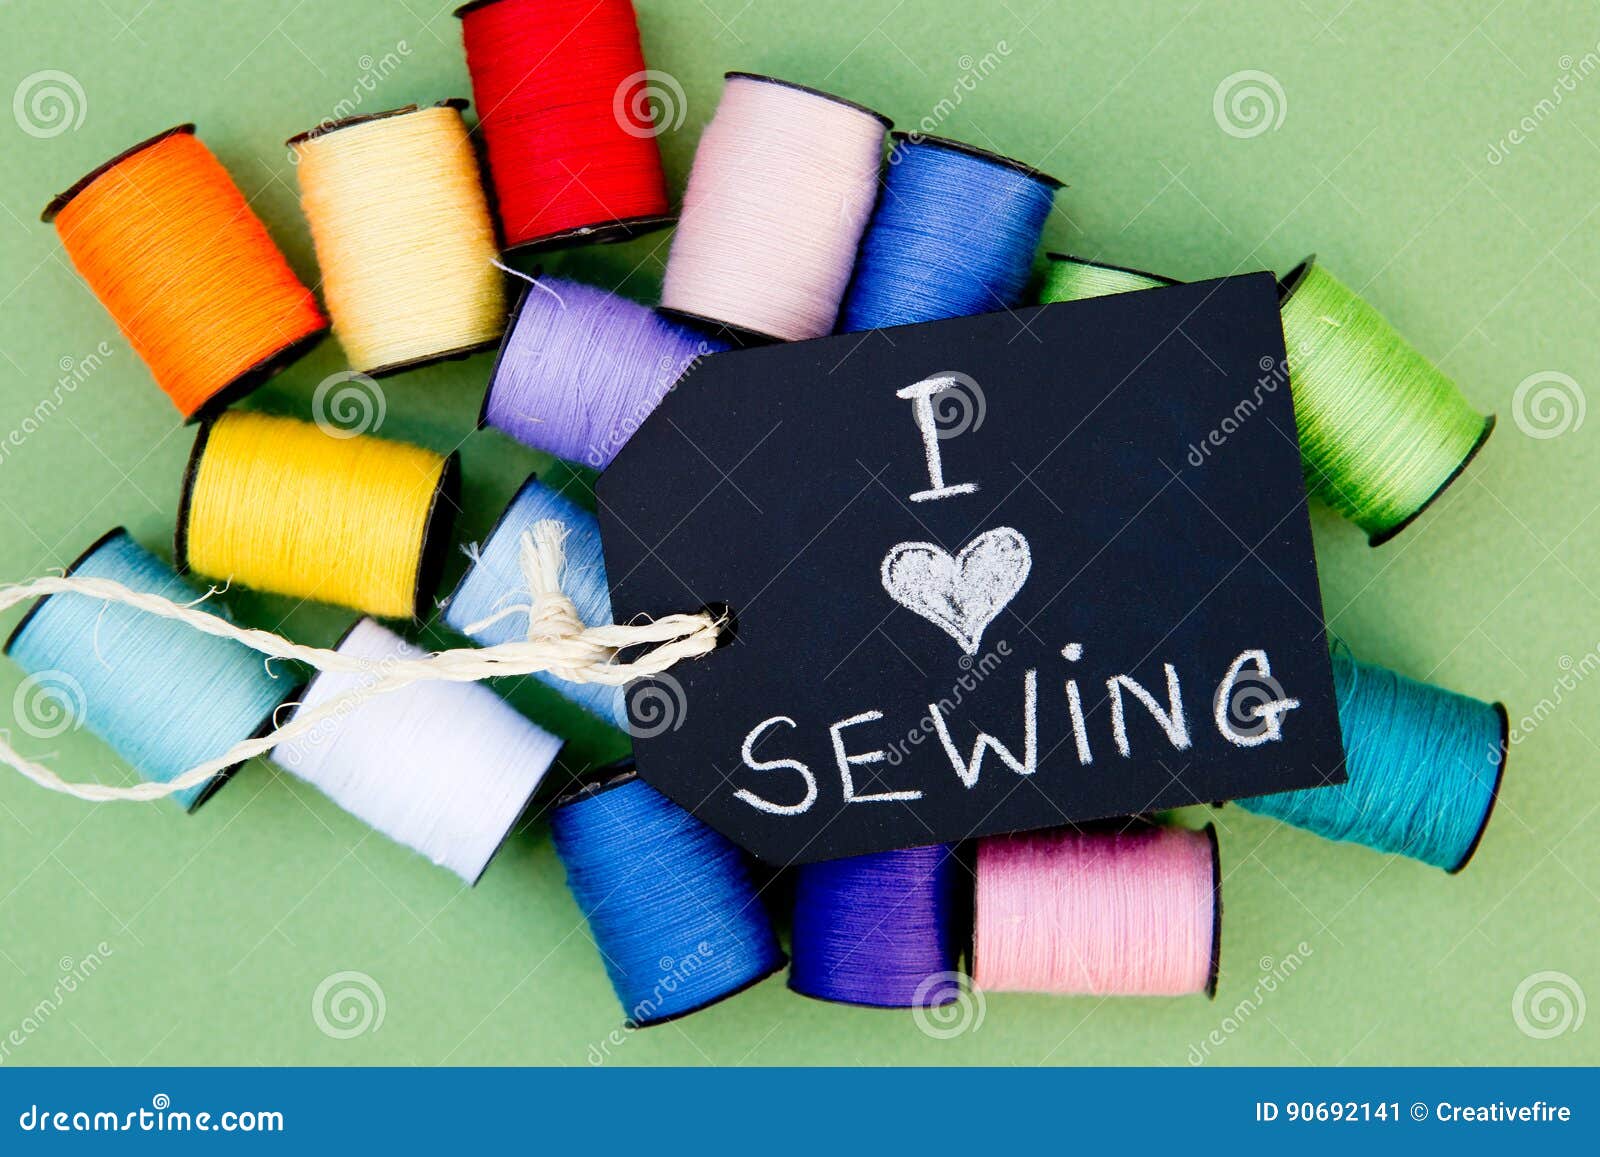 I Love Sewing - Cotton Reels Background with Blackboard Stock